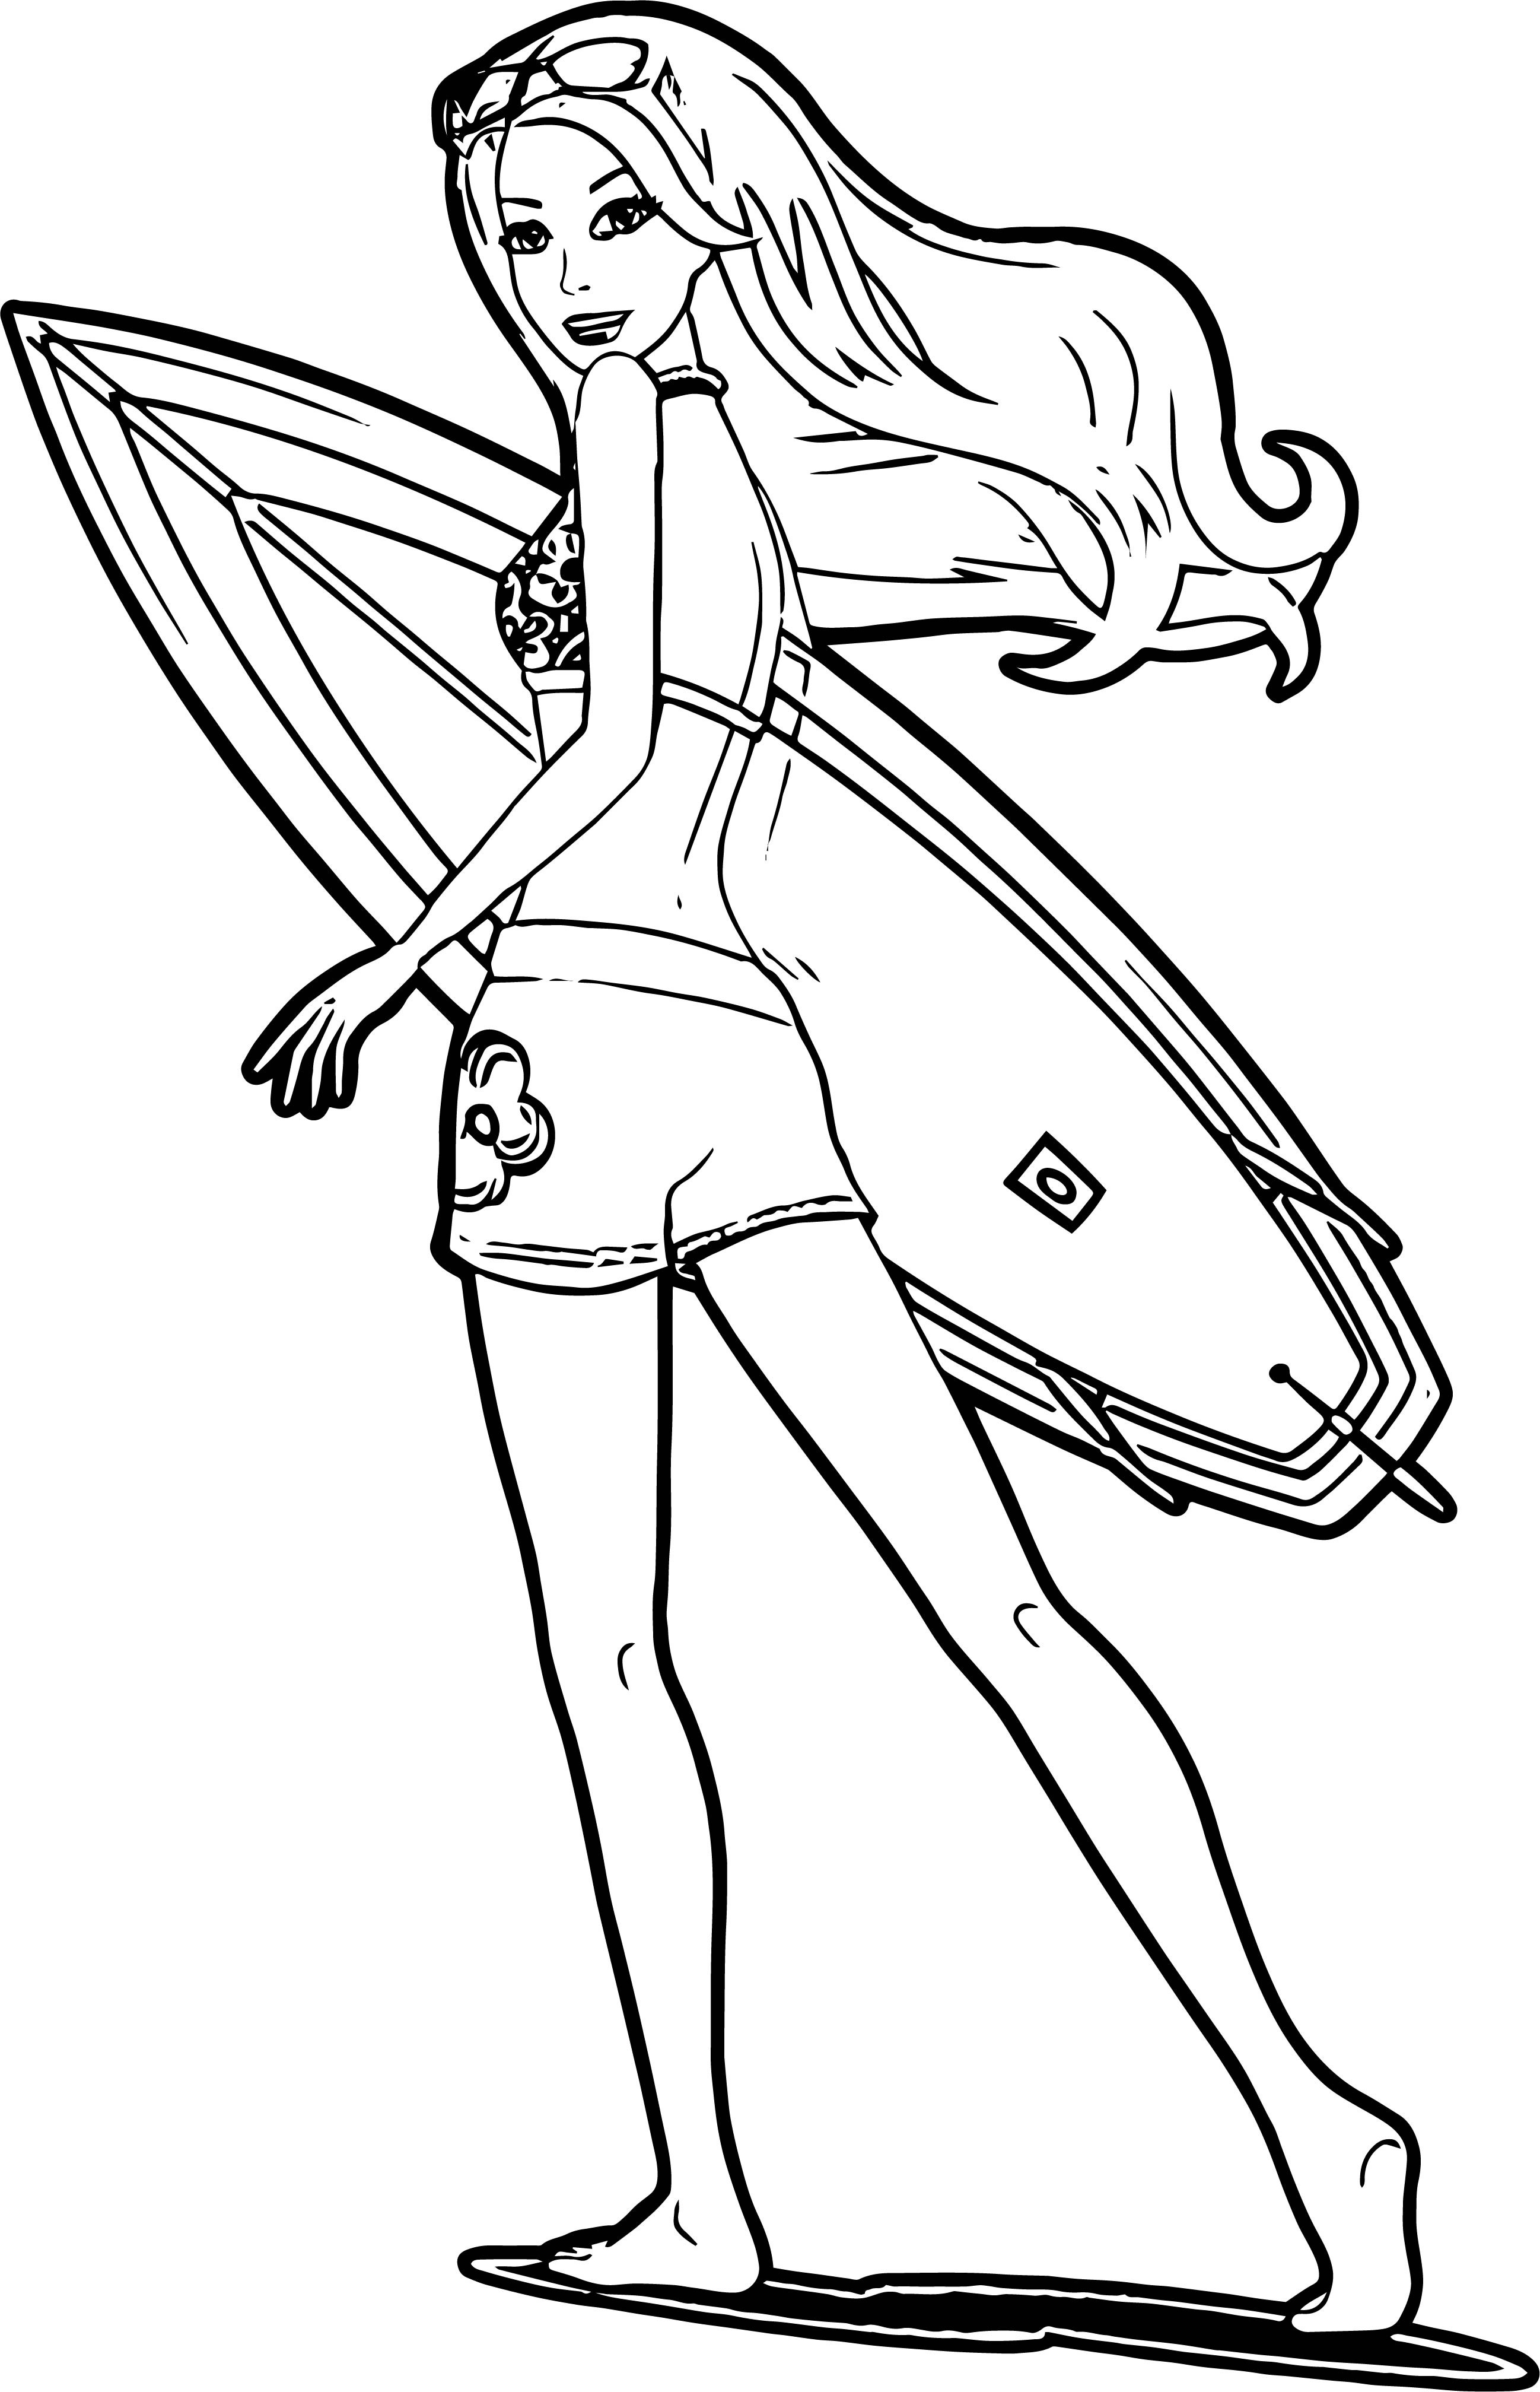 Girl Surfing Coloring Pages
 Barbie Run Surfing Coloring Page